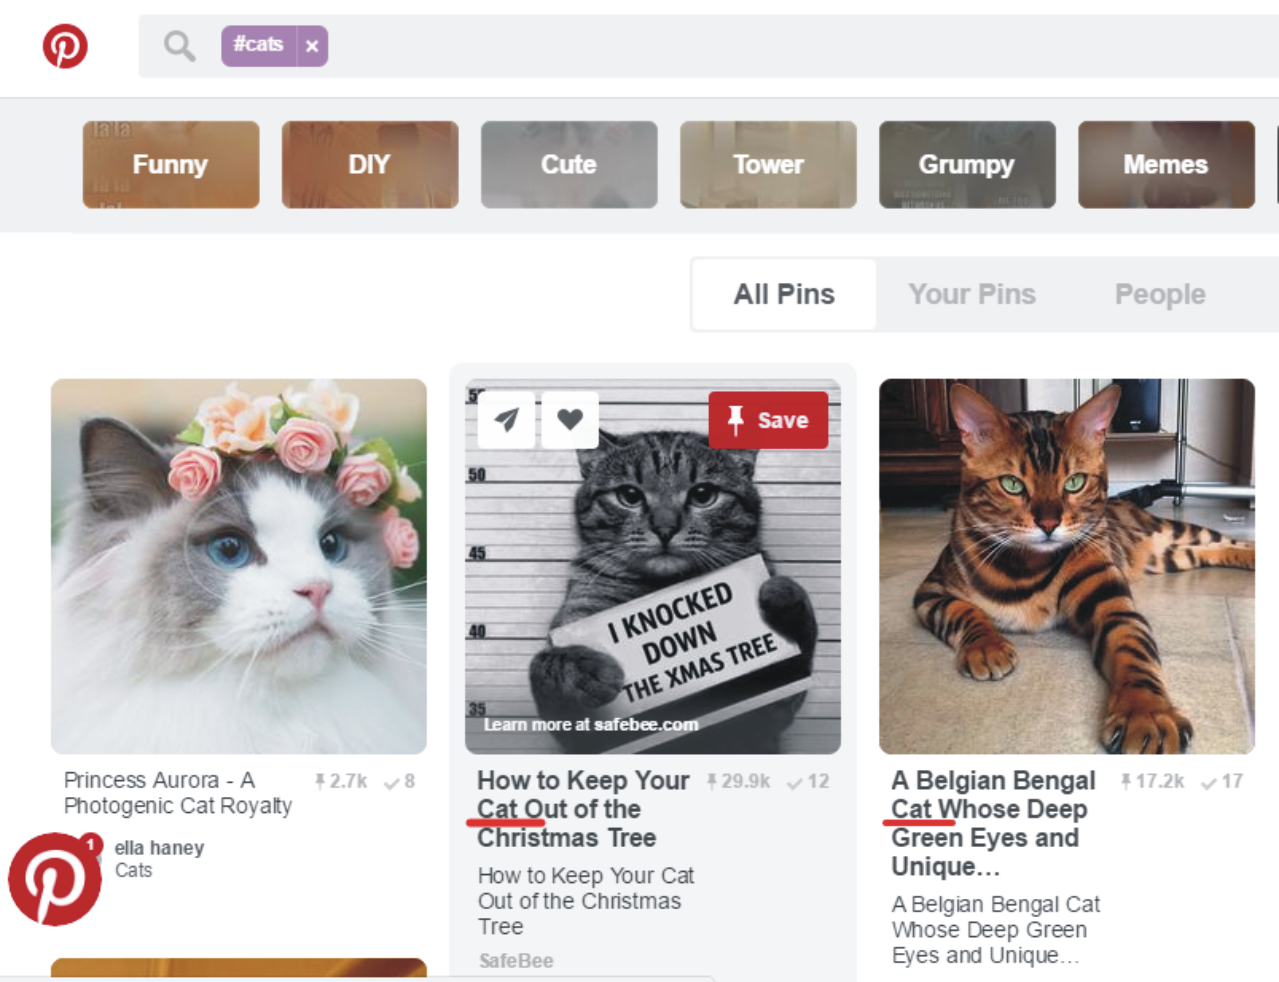 How to Make Use of Pinterest's Shopping Features